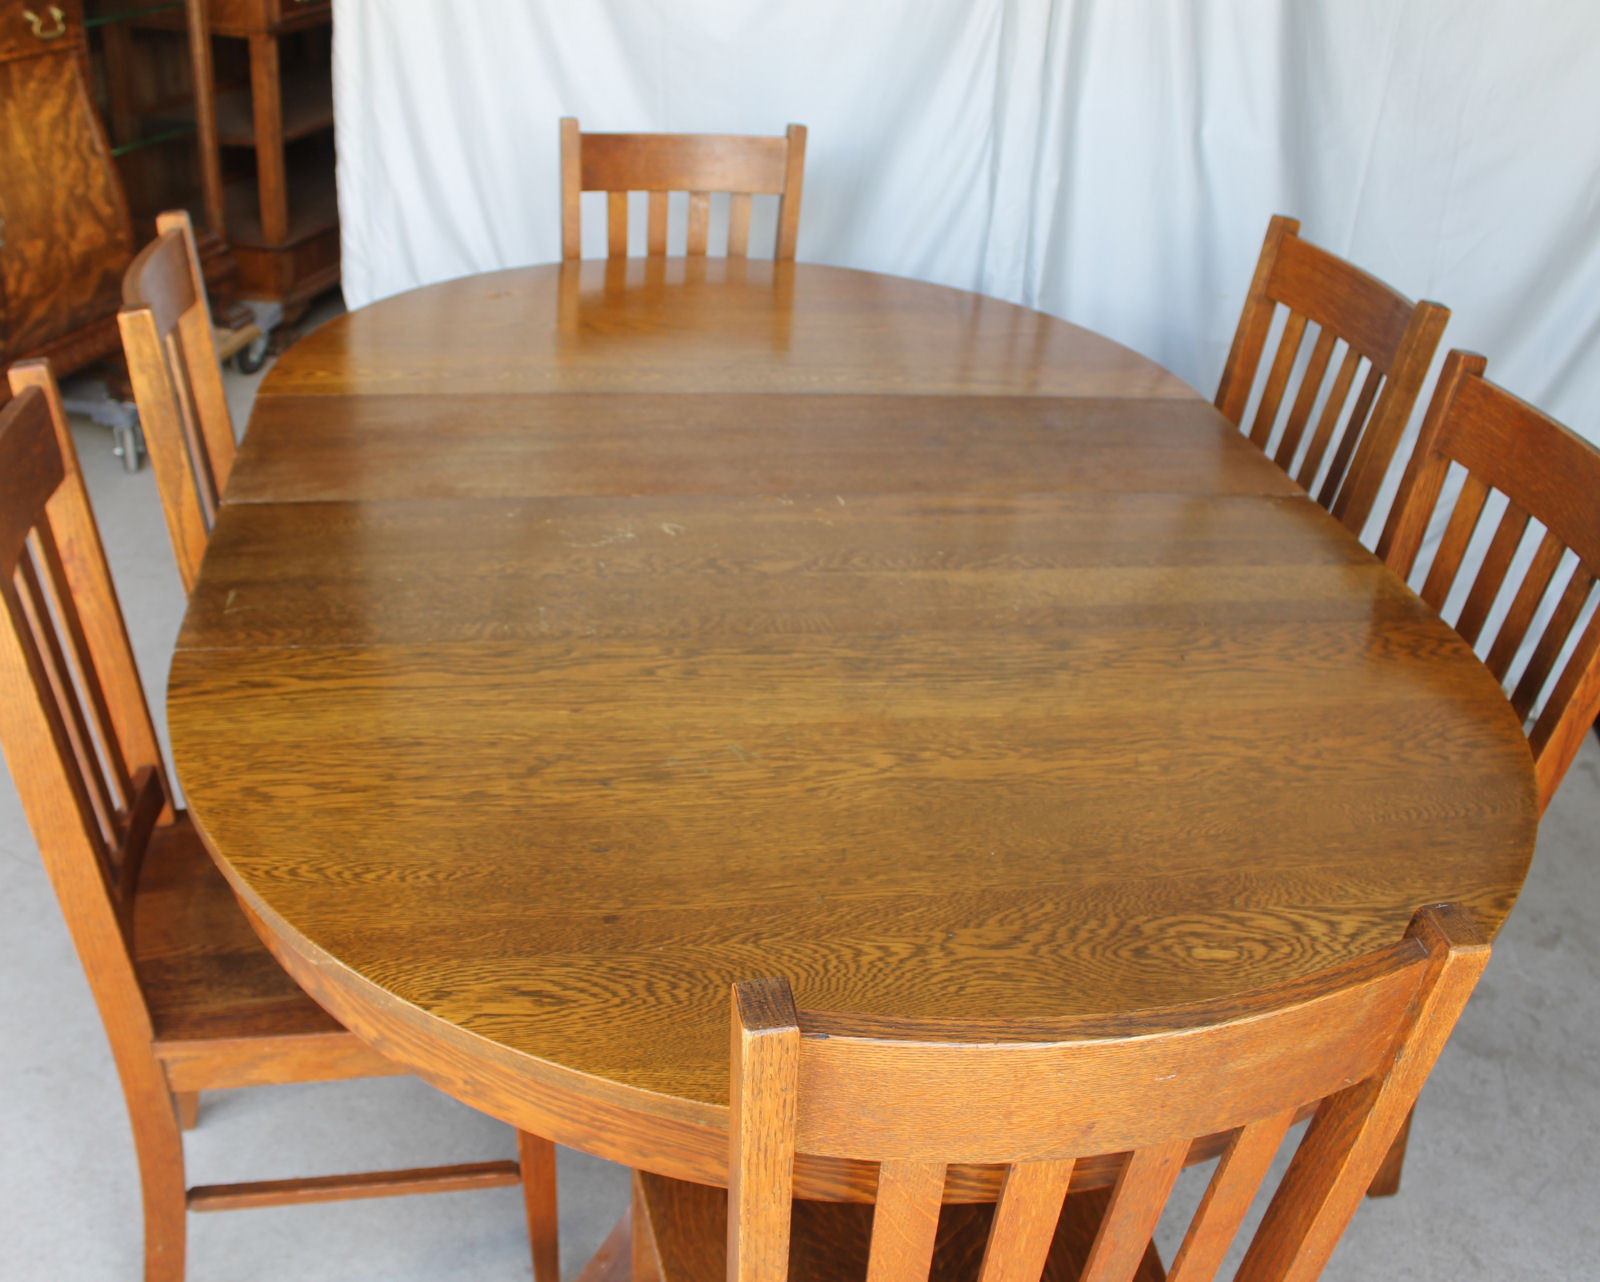 Bargain John's Antiques | Antique Mission style Round Oak Table with 4